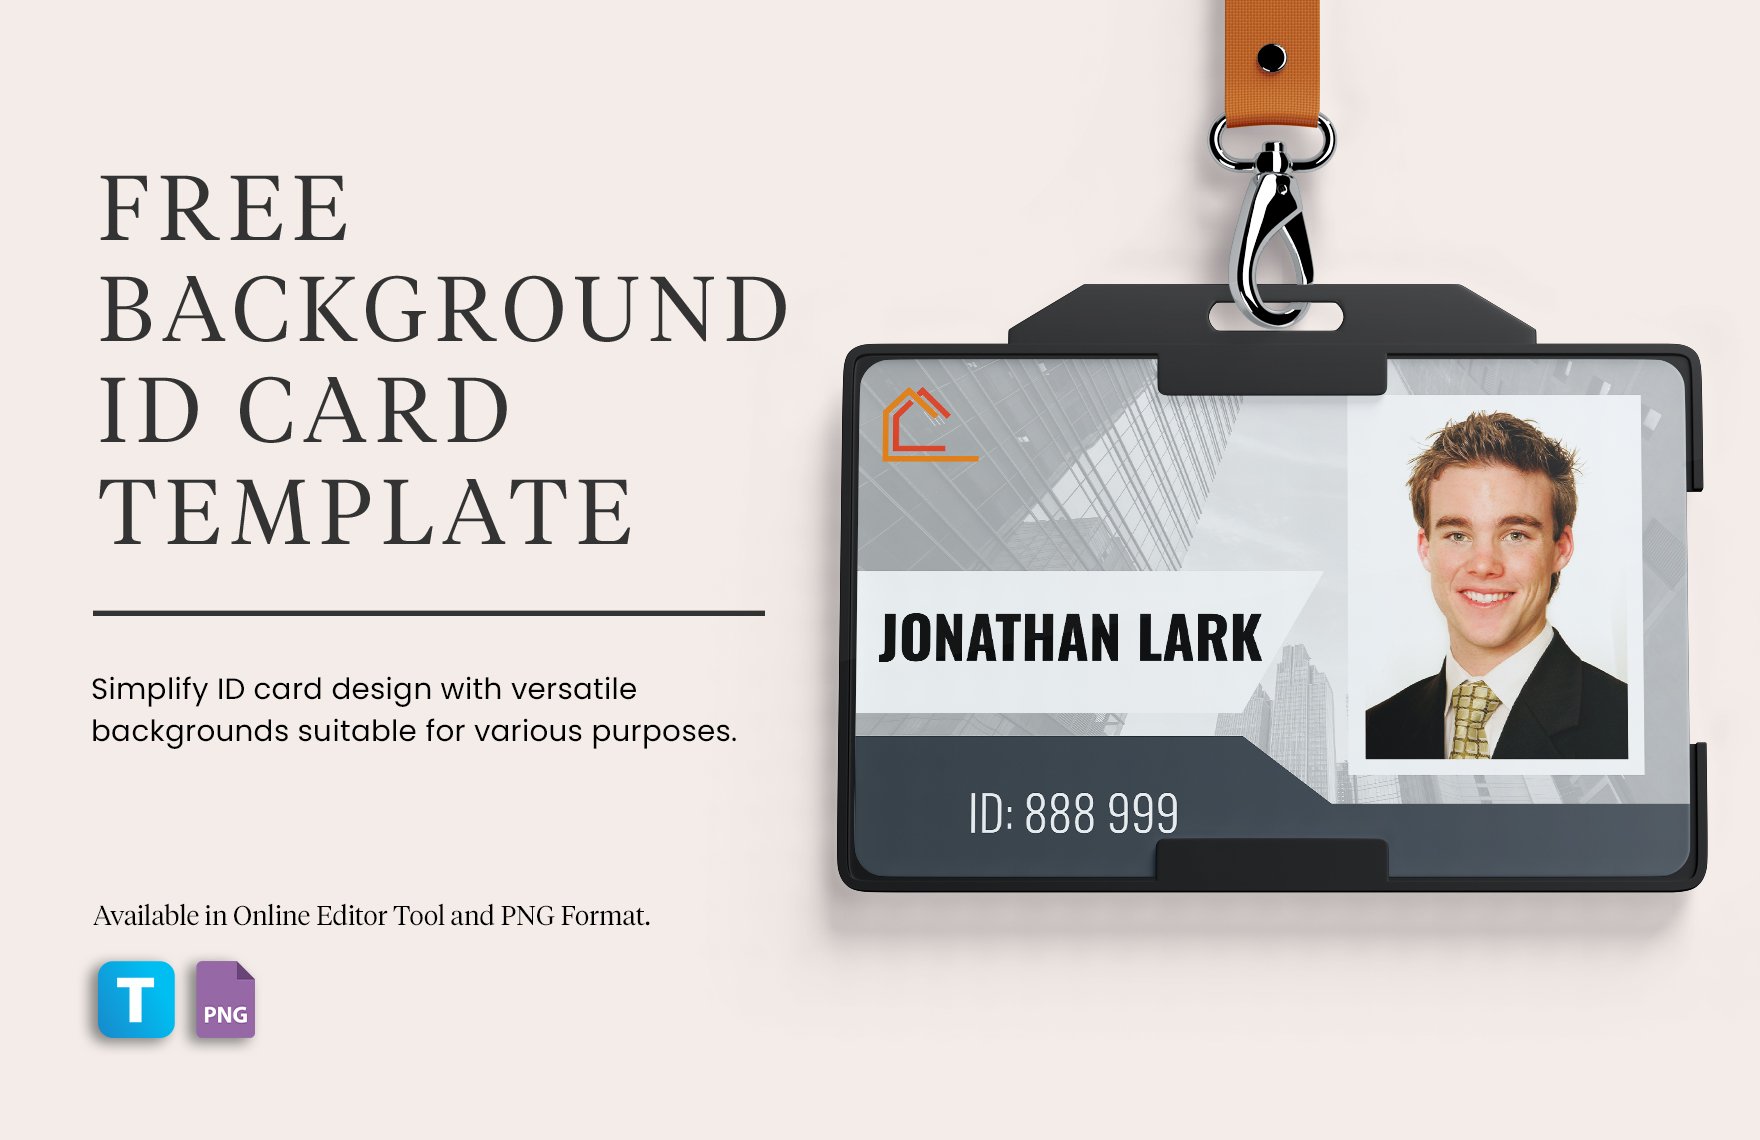 Free Background ID Card Template in PNG